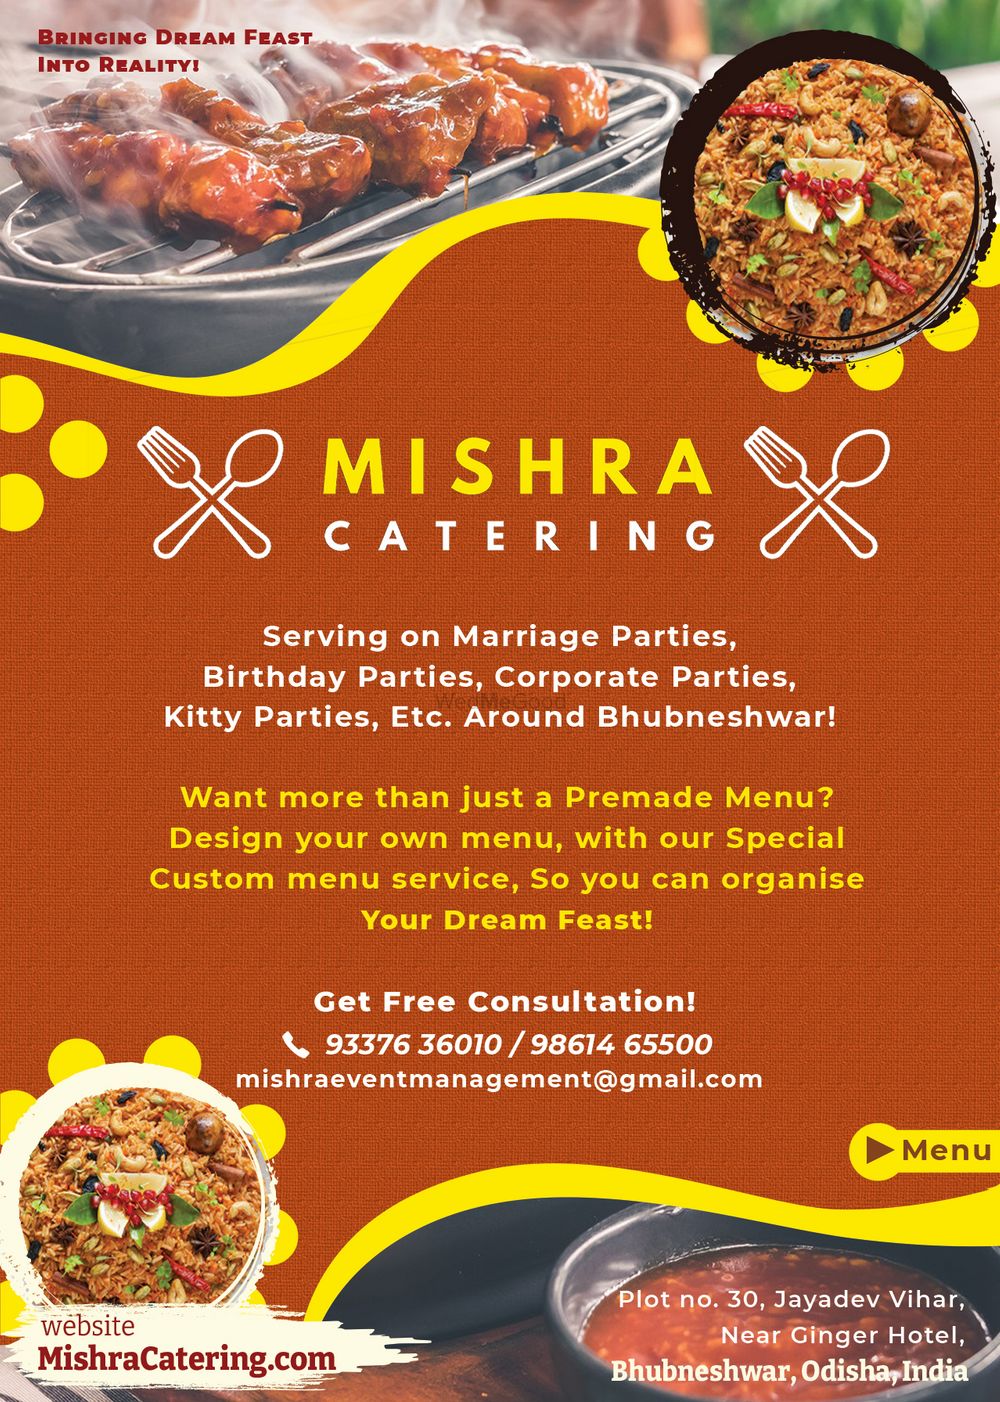 Photo By Mishra Event Management - Catering Services